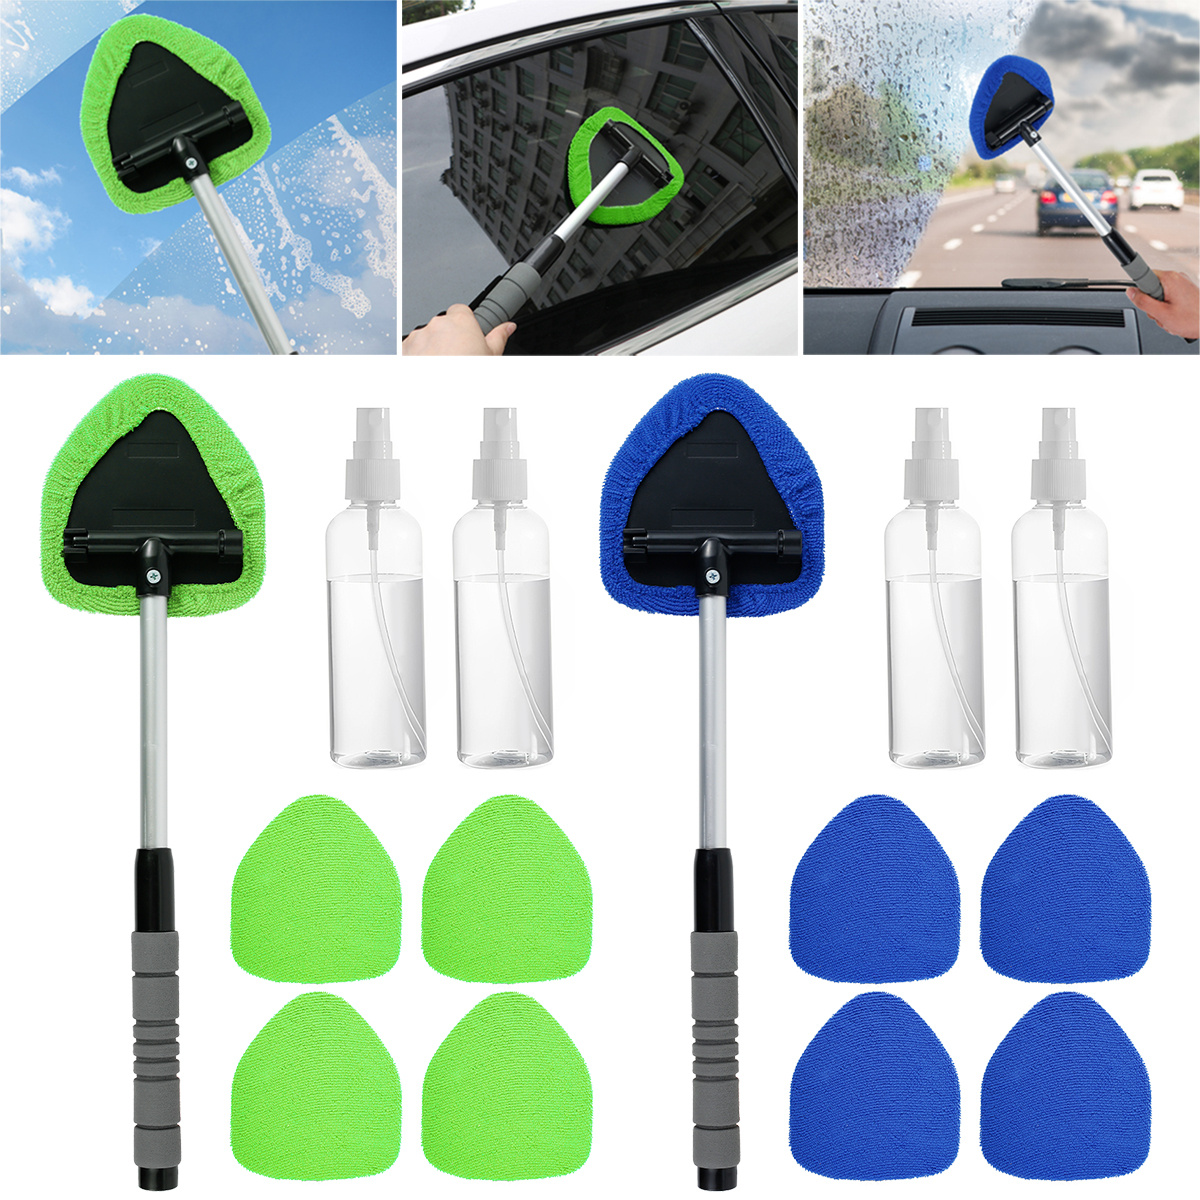 CARDETAIL Glass Clean Tool - Car Window Cleaner